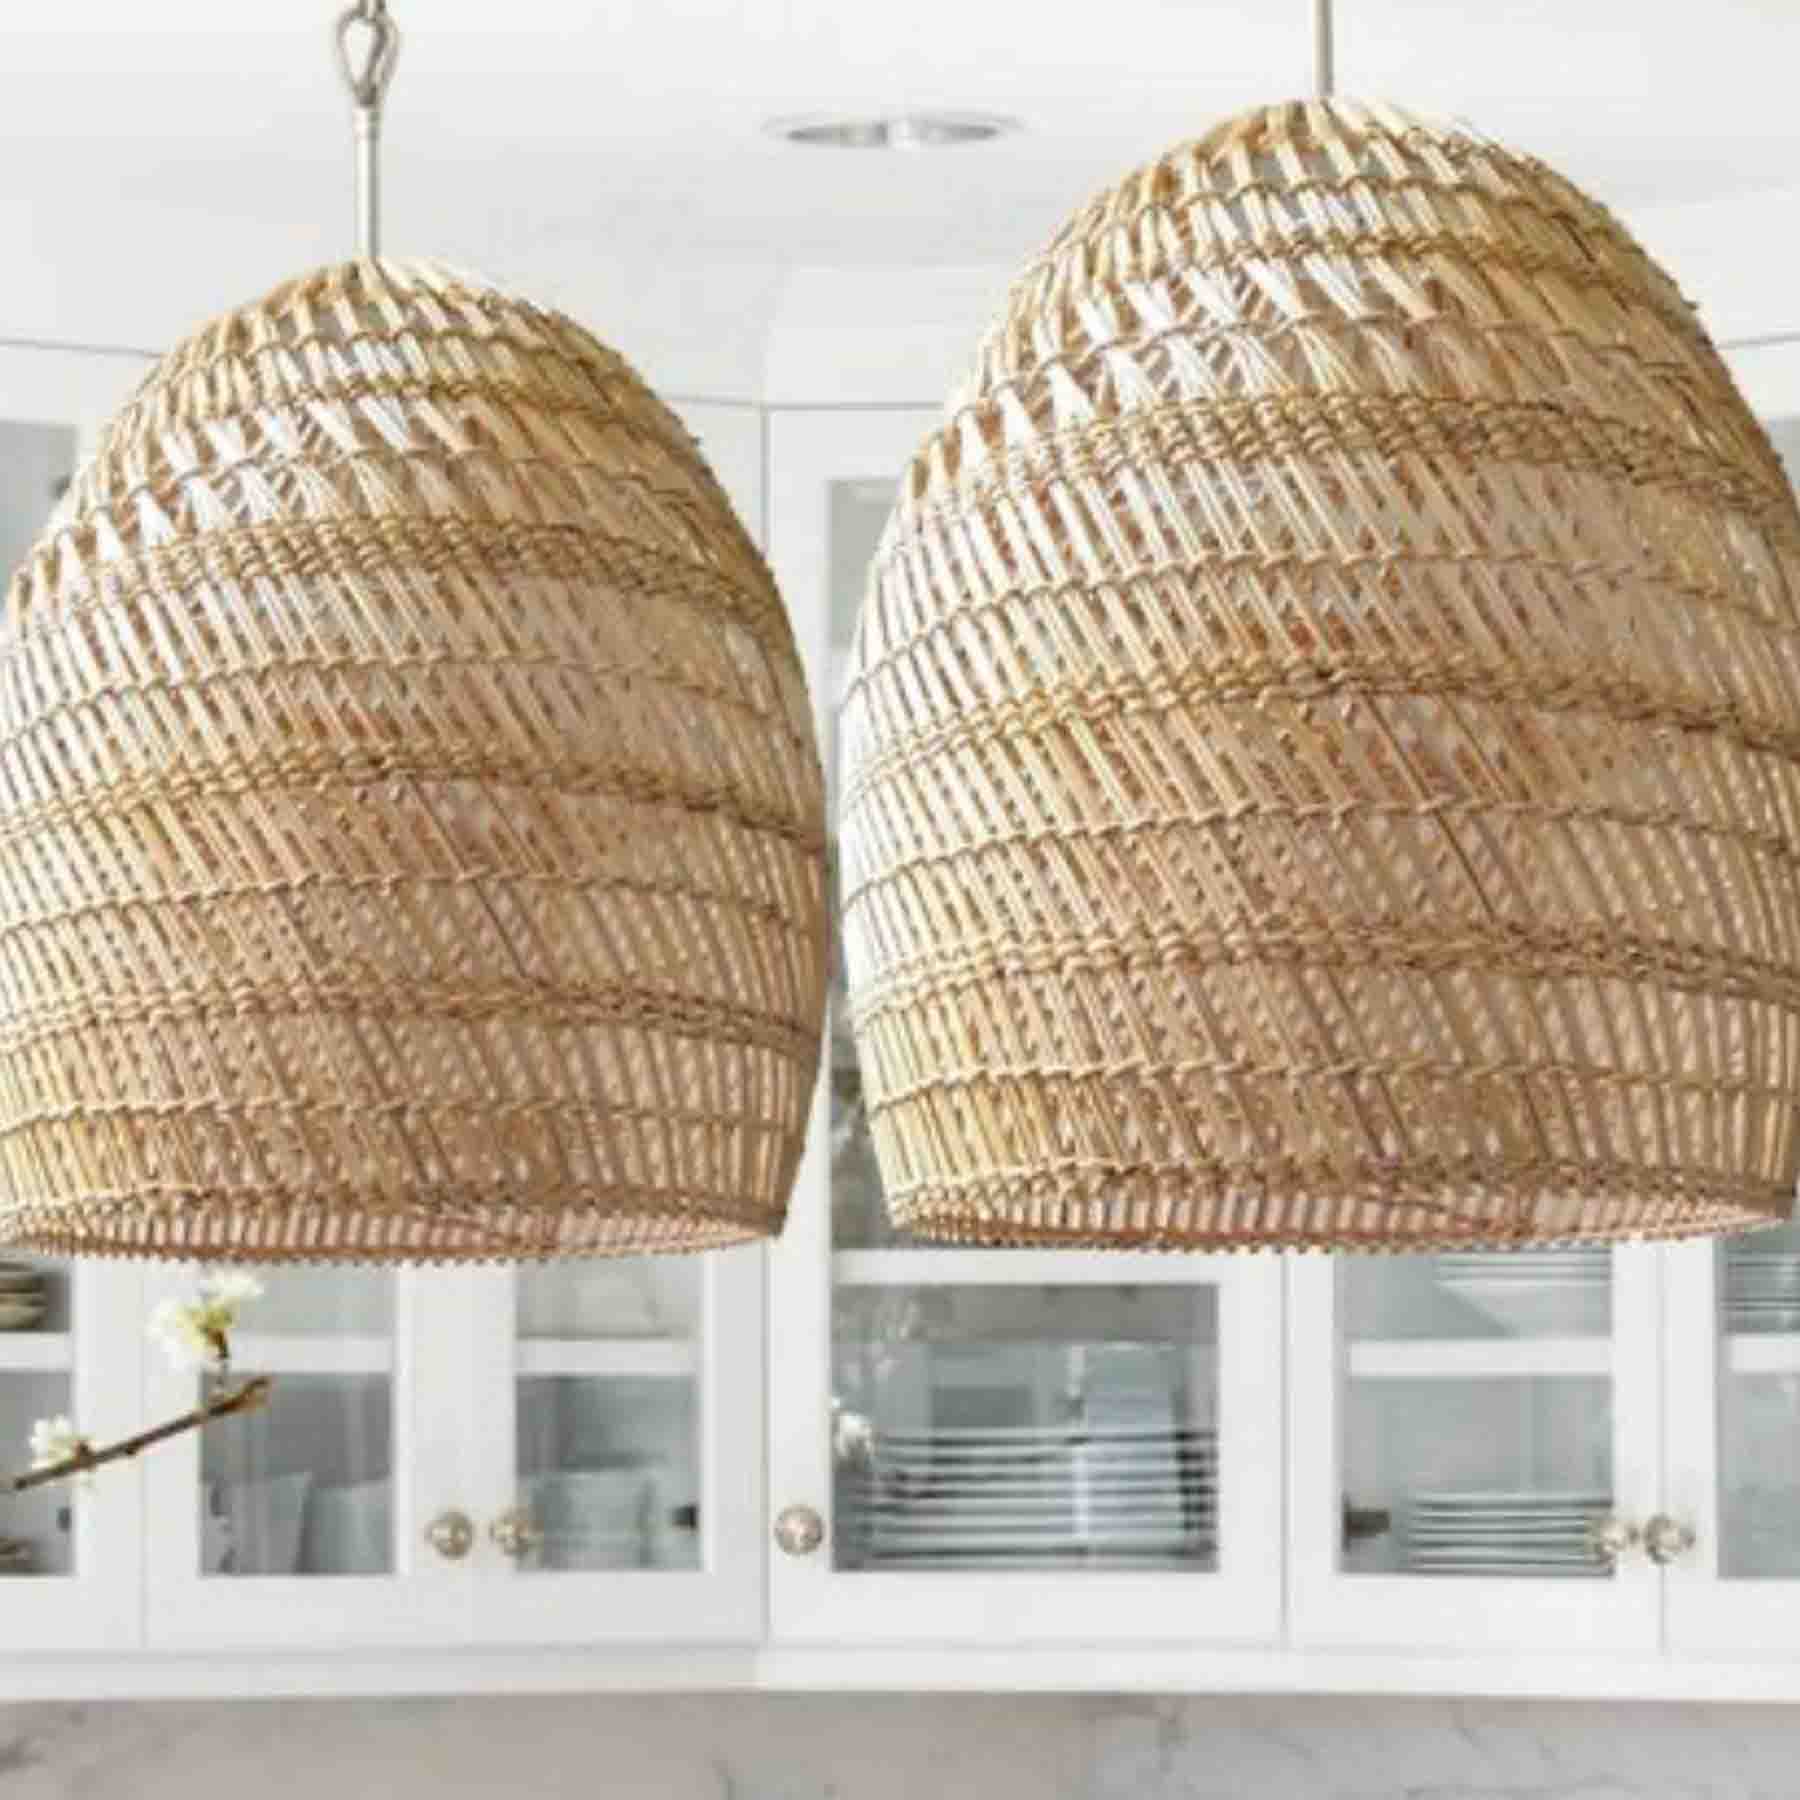 rattan pendant lights can utterly transform a homes overall aesthetics